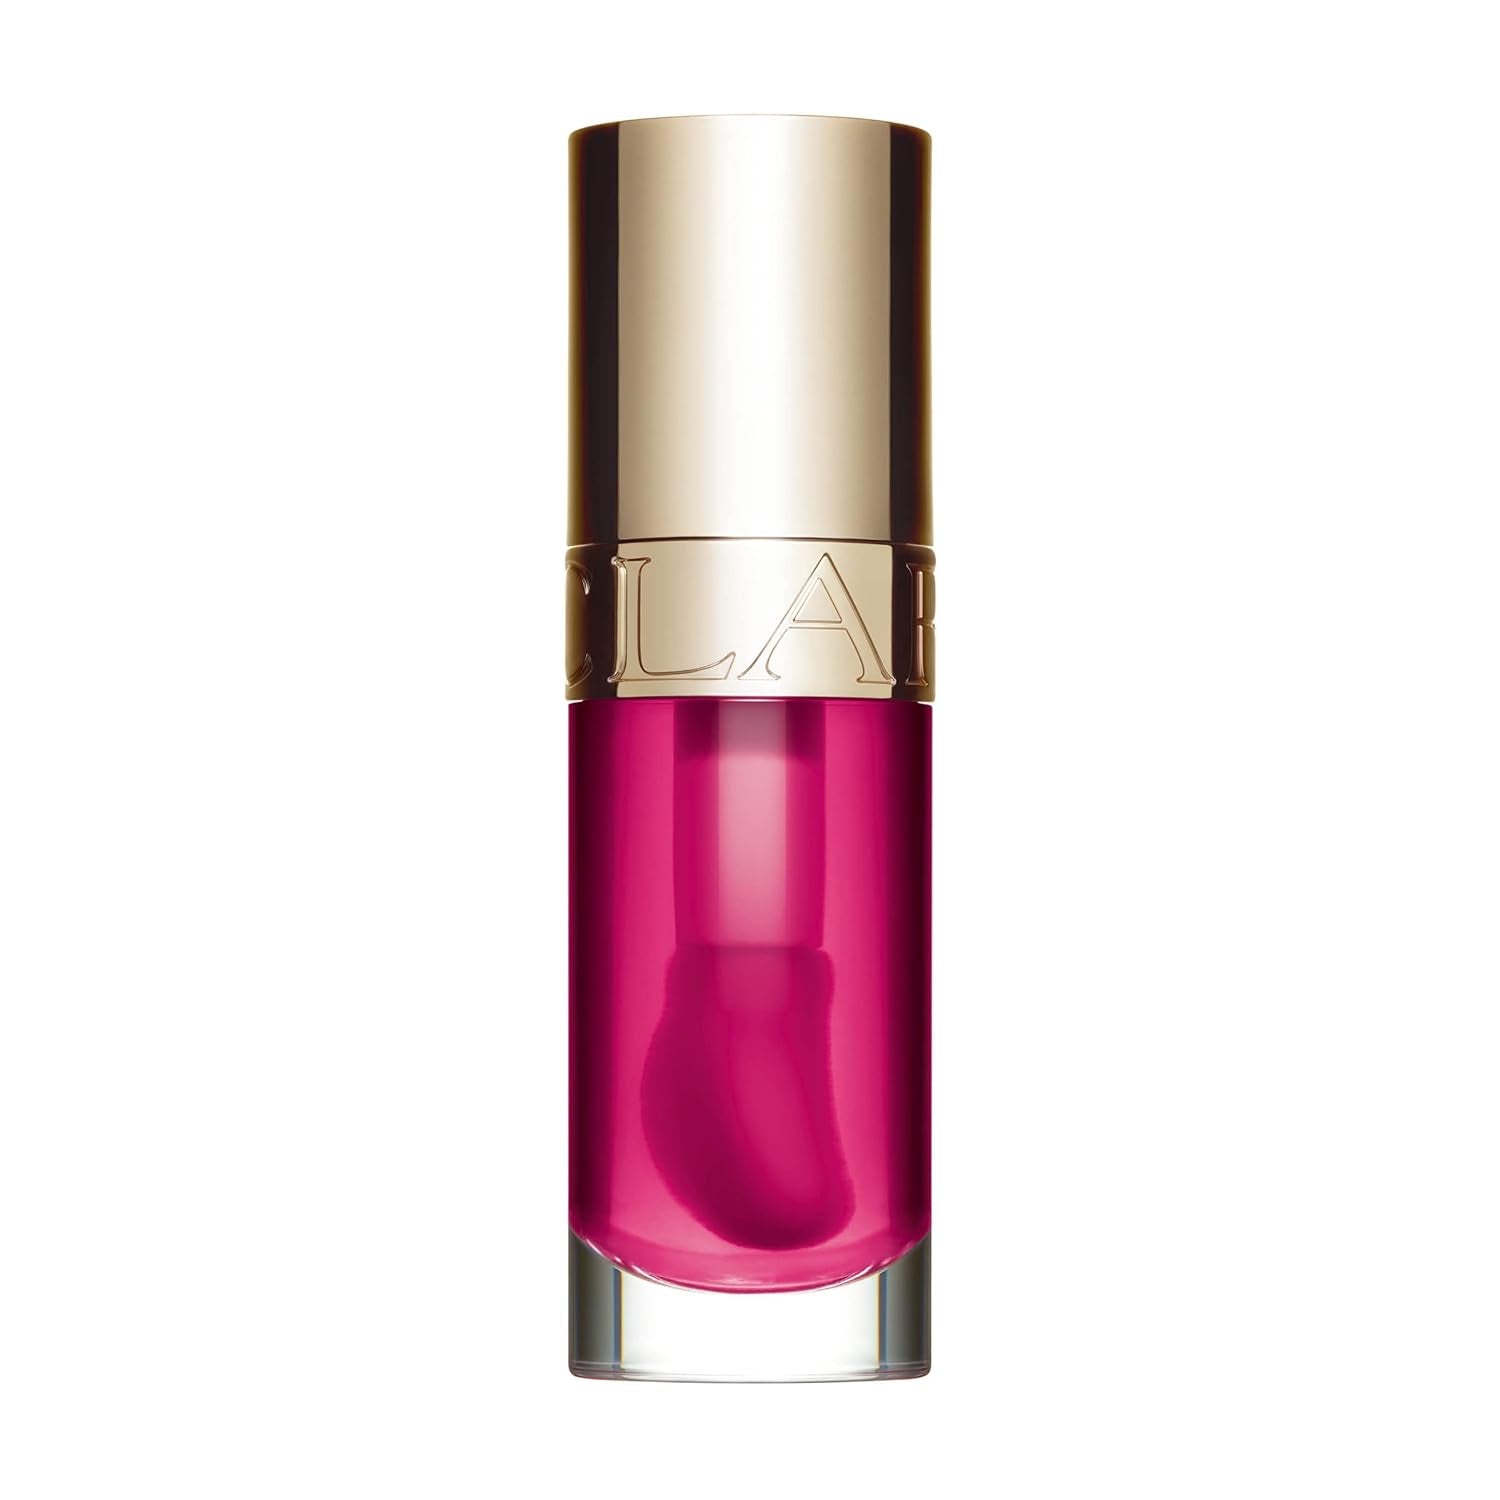 "Clarins Lip Comfort Oil: Hydrating, Plumping, and Nourishing Sheer Lip Treatment"